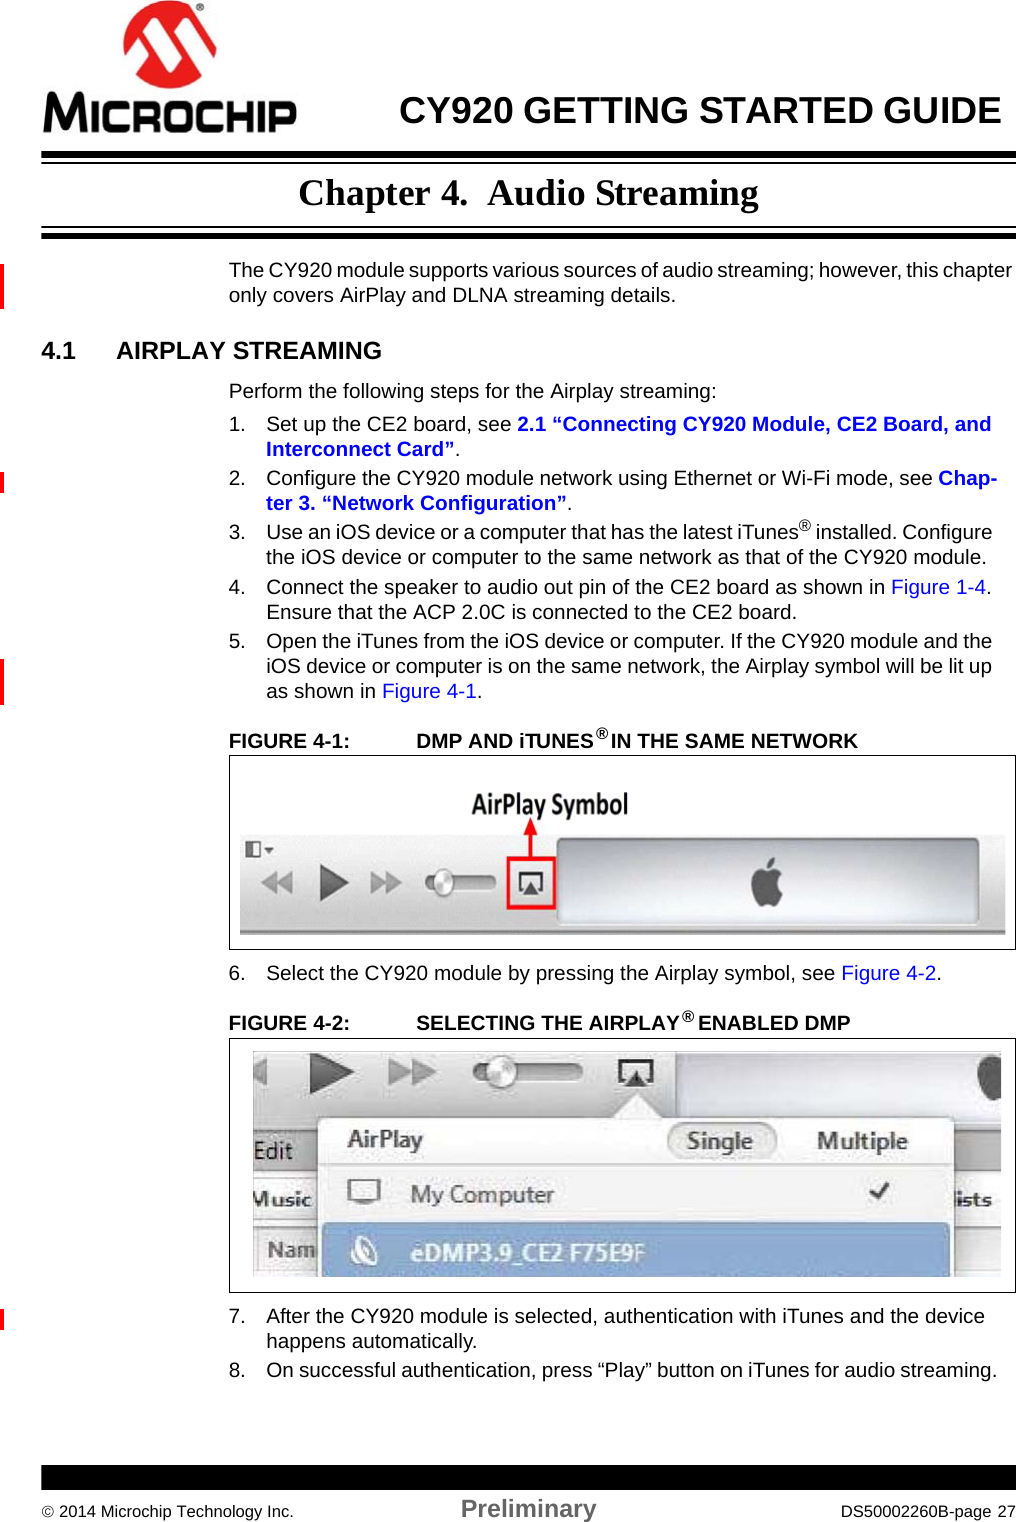  CY920 GETTING STARTED GUIDE  2014 Microchip Technology Inc. Preliminary DS50002260B-page 27Chapter 4.  Audio StreamingThe CY920 module supports various sources of audio streaming; however, this chapter only covers AirPlay and DLNA streaming details.4.1 AIRPLAY STREAMINGPerform the following steps for the Airplay streaming:1. Set up the CE2 board, see 2.1 “Connecting CY920 Module, CE2 Board, and Interconnect Card”.2. Configure the CY920 module network using Ethernet or Wi-Fi mode, see Chap-ter 3. “Network Configuration”.3. Use an iOS device or a computer that has the latest iTunes® installed. Configure the iOS device or computer to the same network as that of the CY920 module.4. Connect the speaker to audio out pin of the CE2 board as shown in Figure 1-4. Ensure that the ACP 2.0C is connected to the CE2 board.5. Open the iTunes from the iOS device or computer. If the CY920 module and the iOS device or computer is on the same network, the Airplay symbol will be lit up as shown in Figure 4-1.FIGURE 4-1: DMP AND iTUNES®  IN THE SAME NETWORK6. Select the CY920 module by pressing the Airplay symbol, see Figure 4-2.FIGURE 4-2: SELECTING THE AIRPLAY® ENABLED DMP7. After the CY920 module is selected, authentication with iTunes and the device happens automatically.8. On successful authentication, press “Play” button on iTunes for audio streaming.